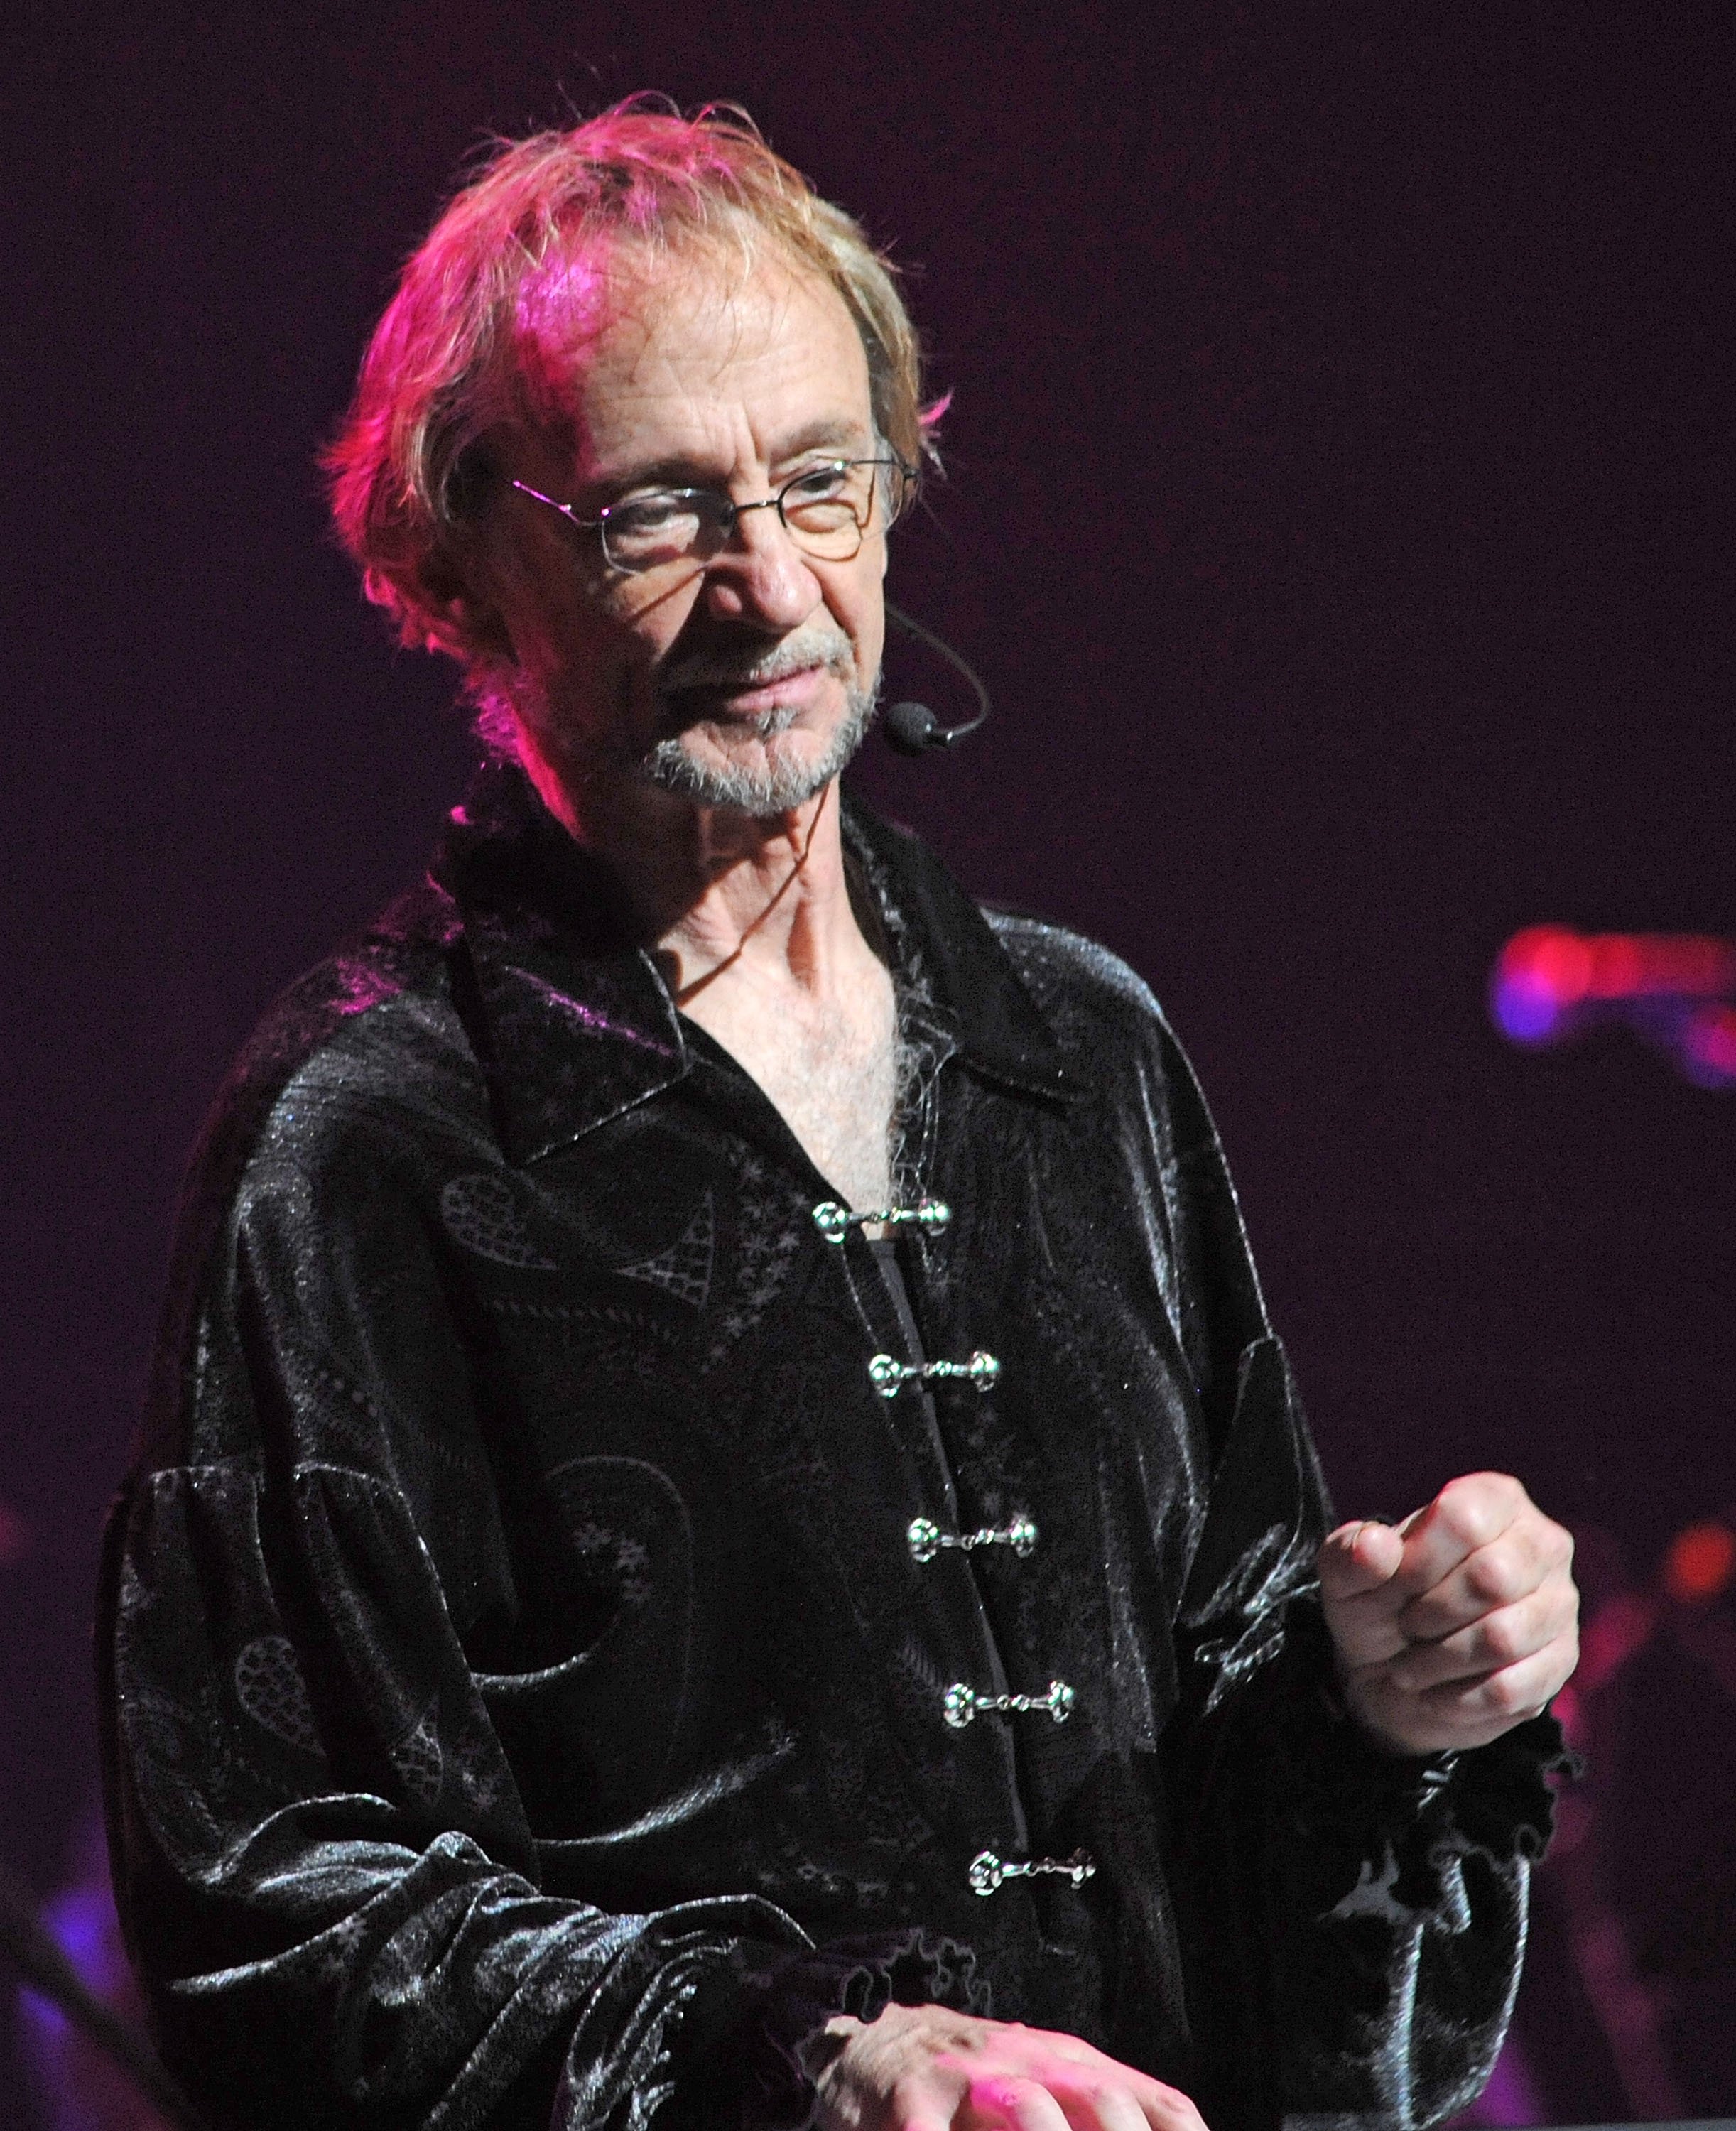 Peter Tork of The Monkees performs at The Beacon Theatre on June 16, 2011 in New York City | Source: Getty Images